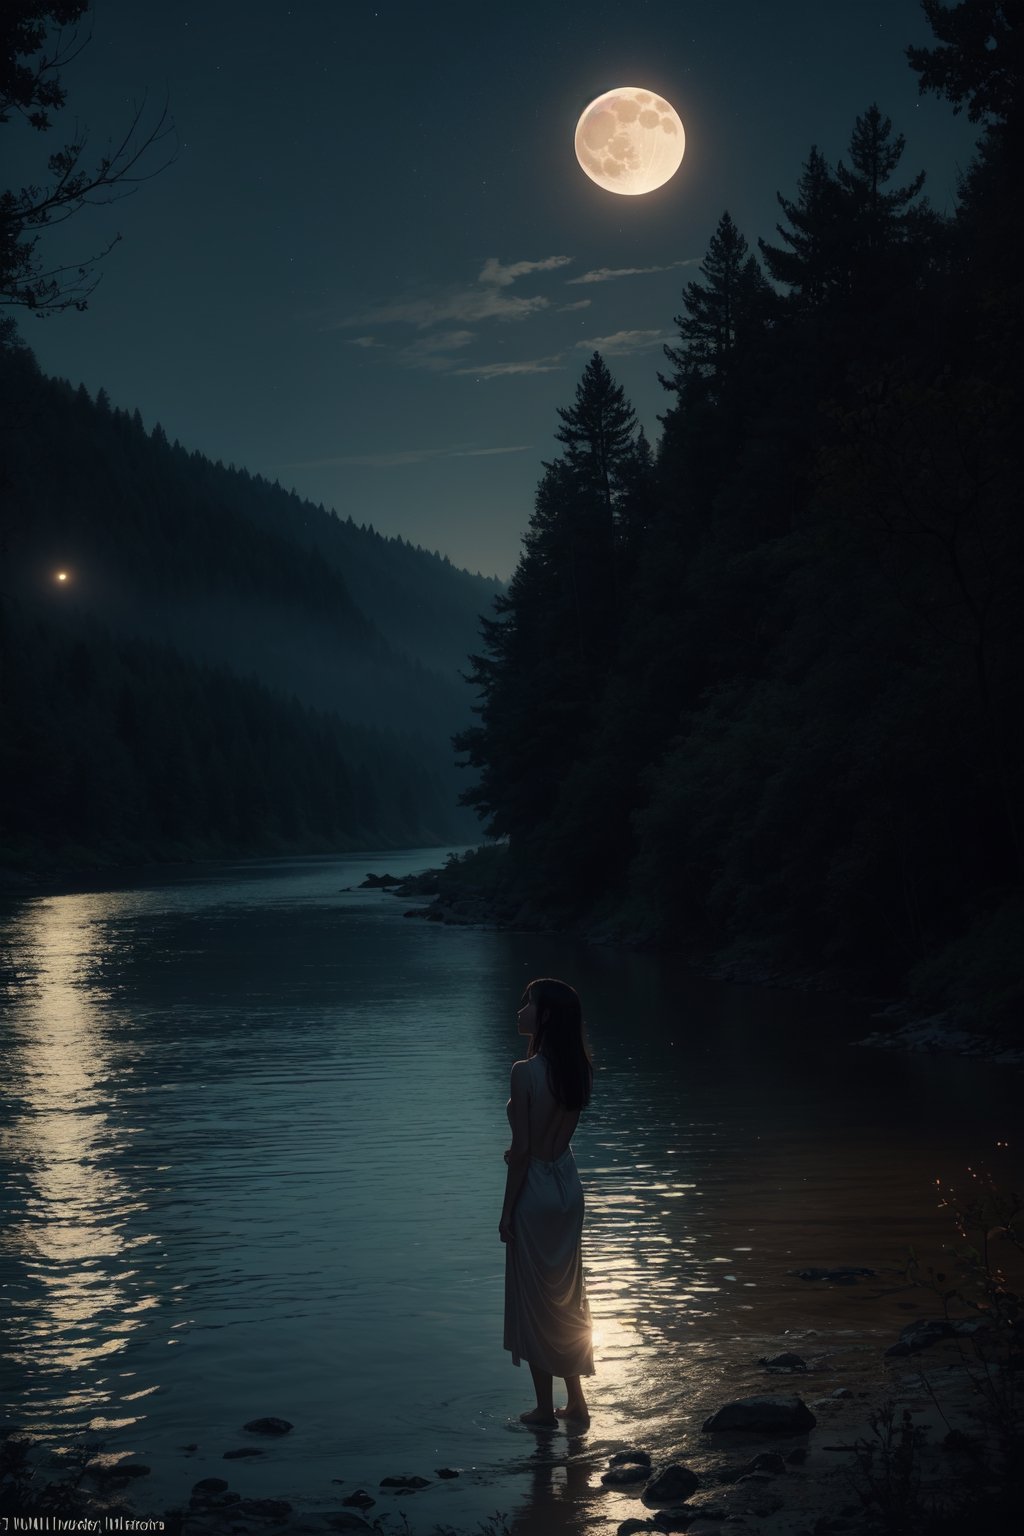 A serene moonlit scene: a girl stands at the river's edge, her back to the camera, gazing up at a towering tree with branches stretching towards the glowing moon. In the distance, an alien spacecraft hovers above the treetops, its gentle hum barely audible over the soft lapping of the water against the shore.